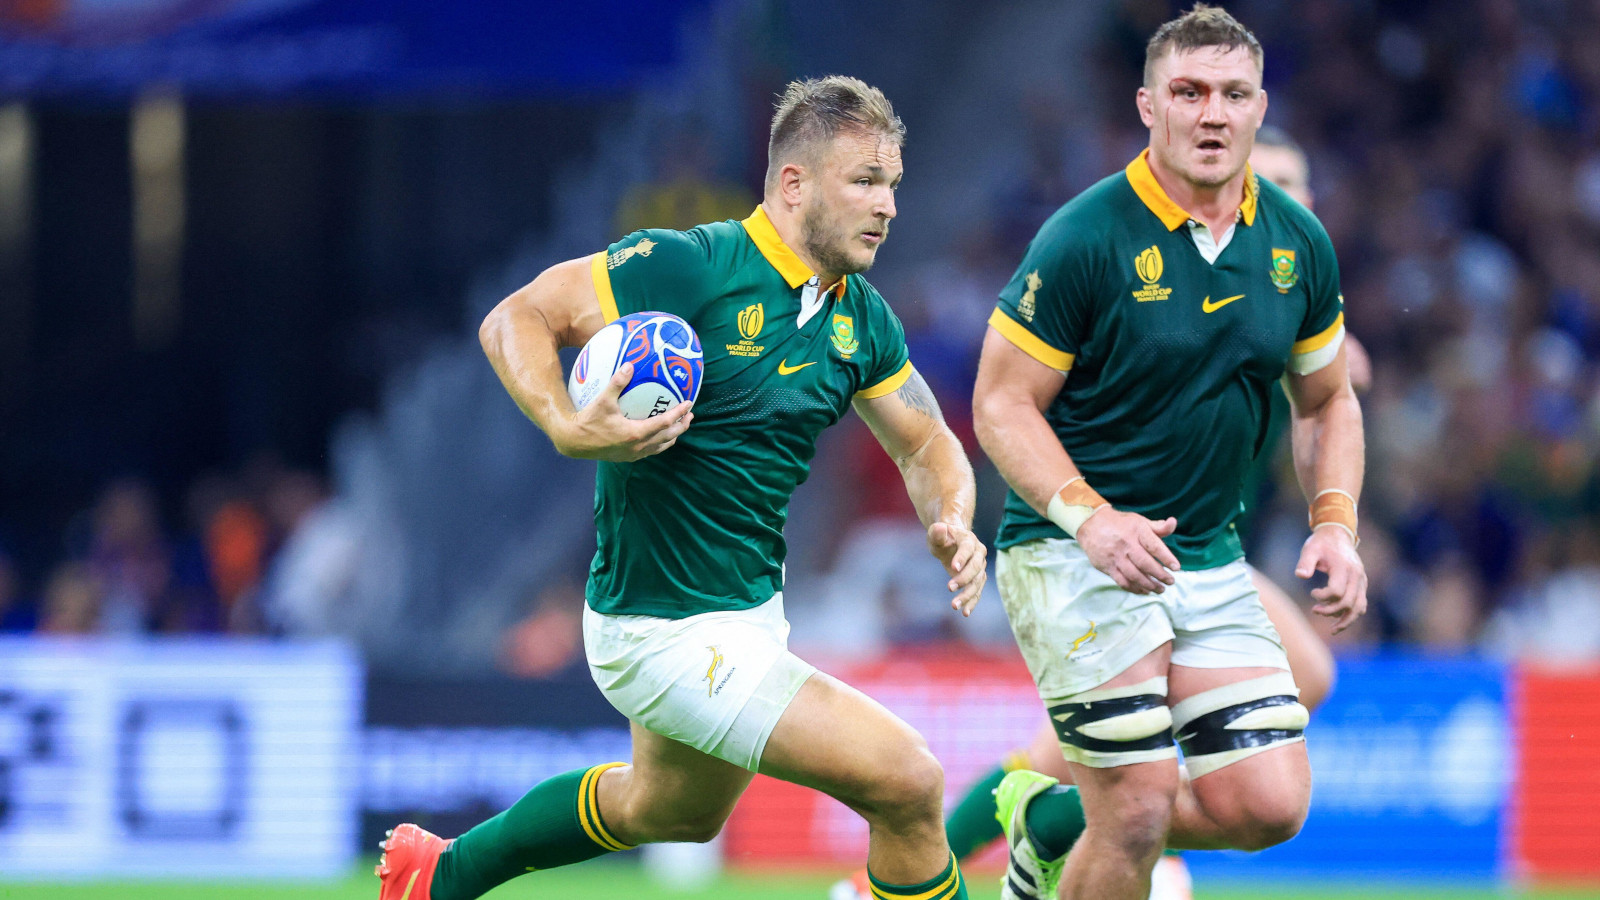 springboks world cup winner makes decision on future as south african homecoming awaits